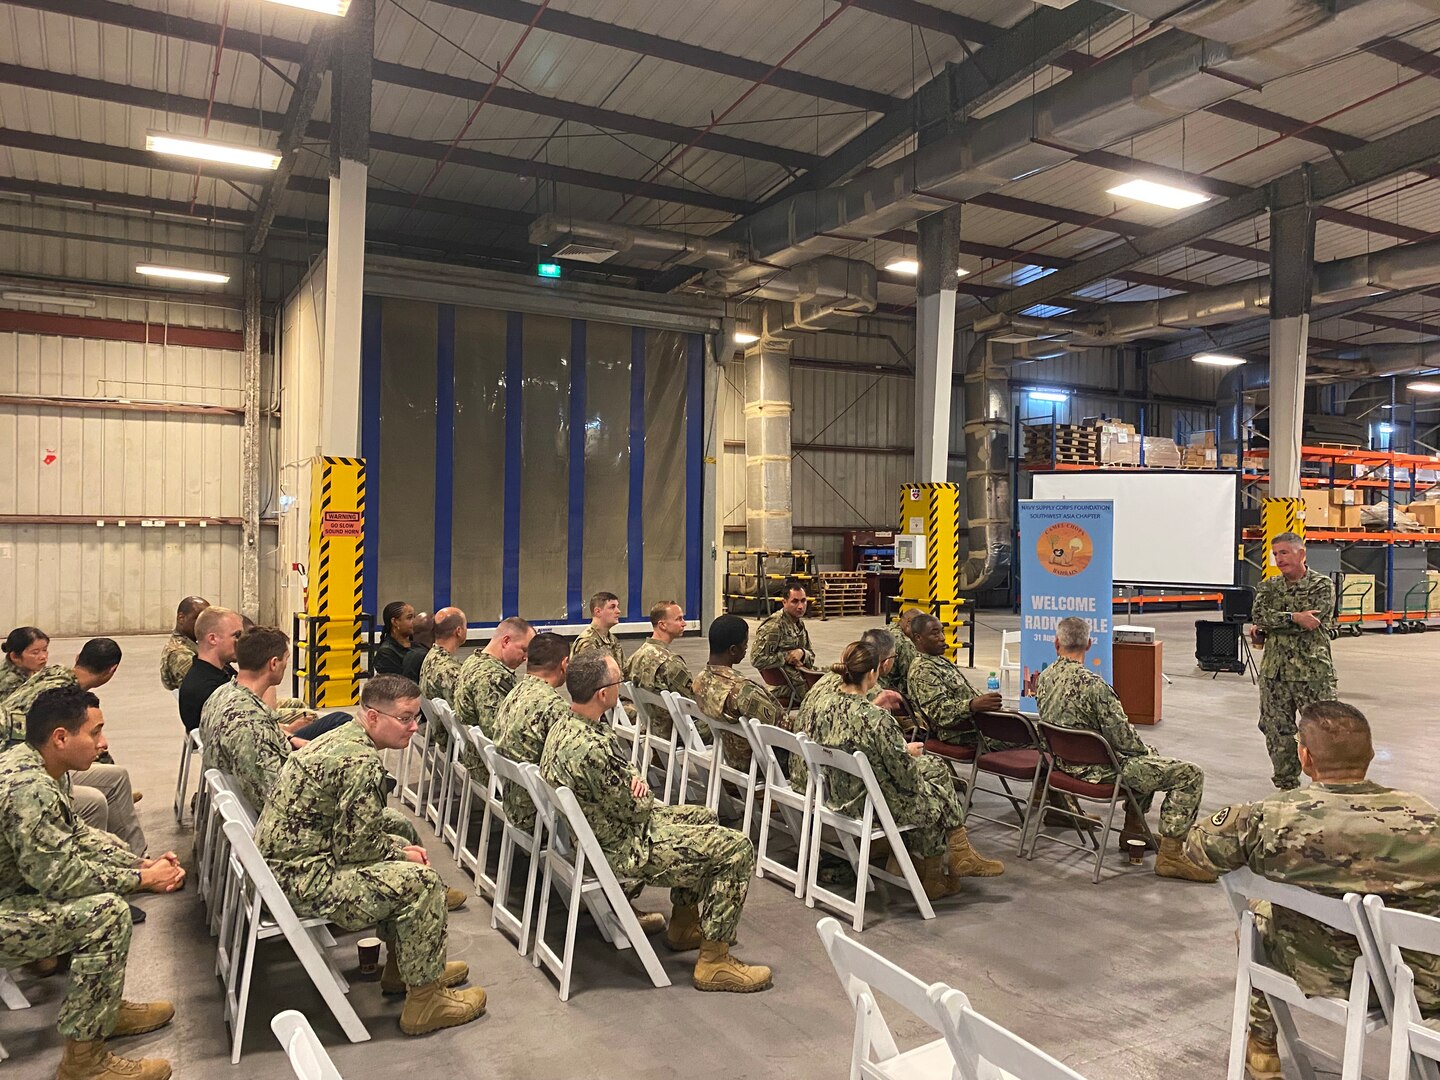 A man in camo uniform addresses men and women also wearing camo sitting in metal folding chairs in a warehouse.